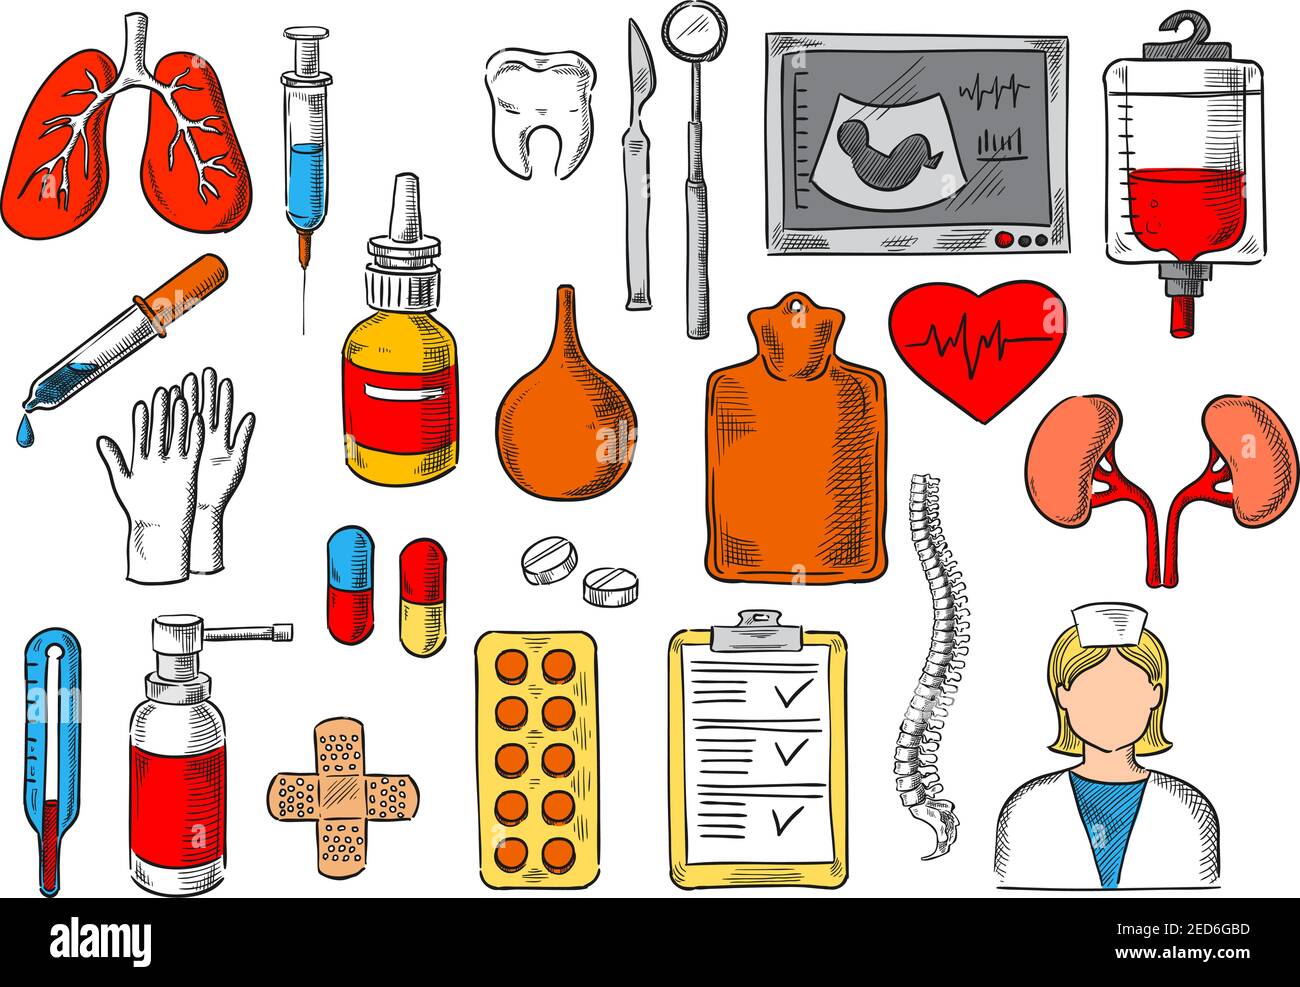 Medicines and treatment tools and items. Vector sketch isolated icons of medical pills, human organs lungs, heart and kidney, blood dropper, enema syr Stock Vector